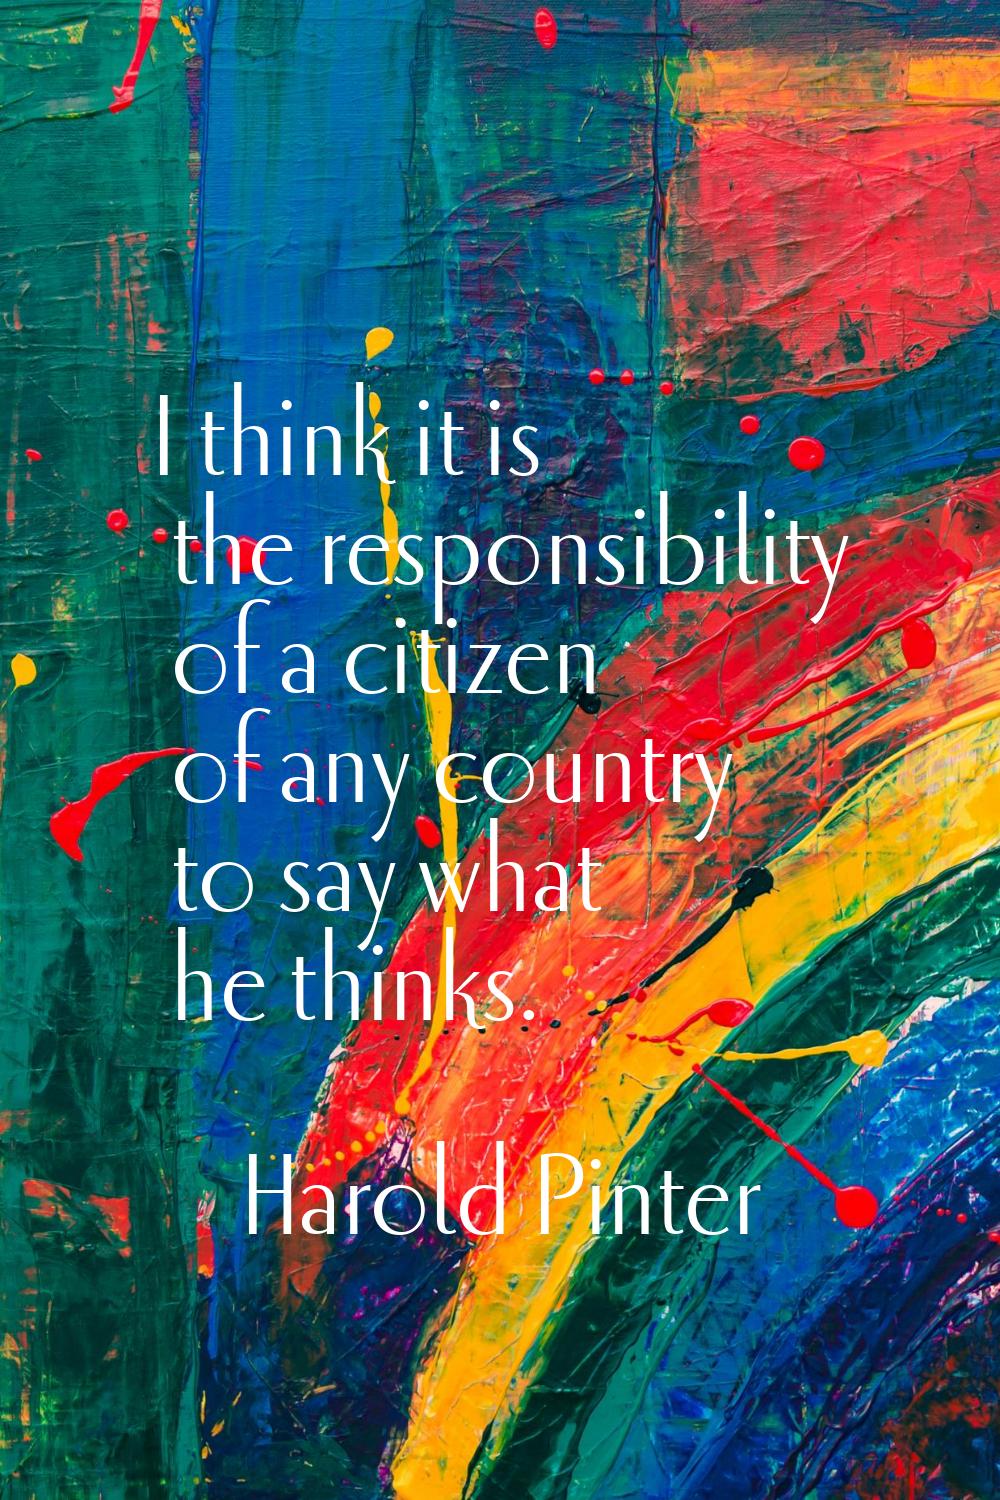 I think it is the responsibility of a citizen of any country to say what he thinks.